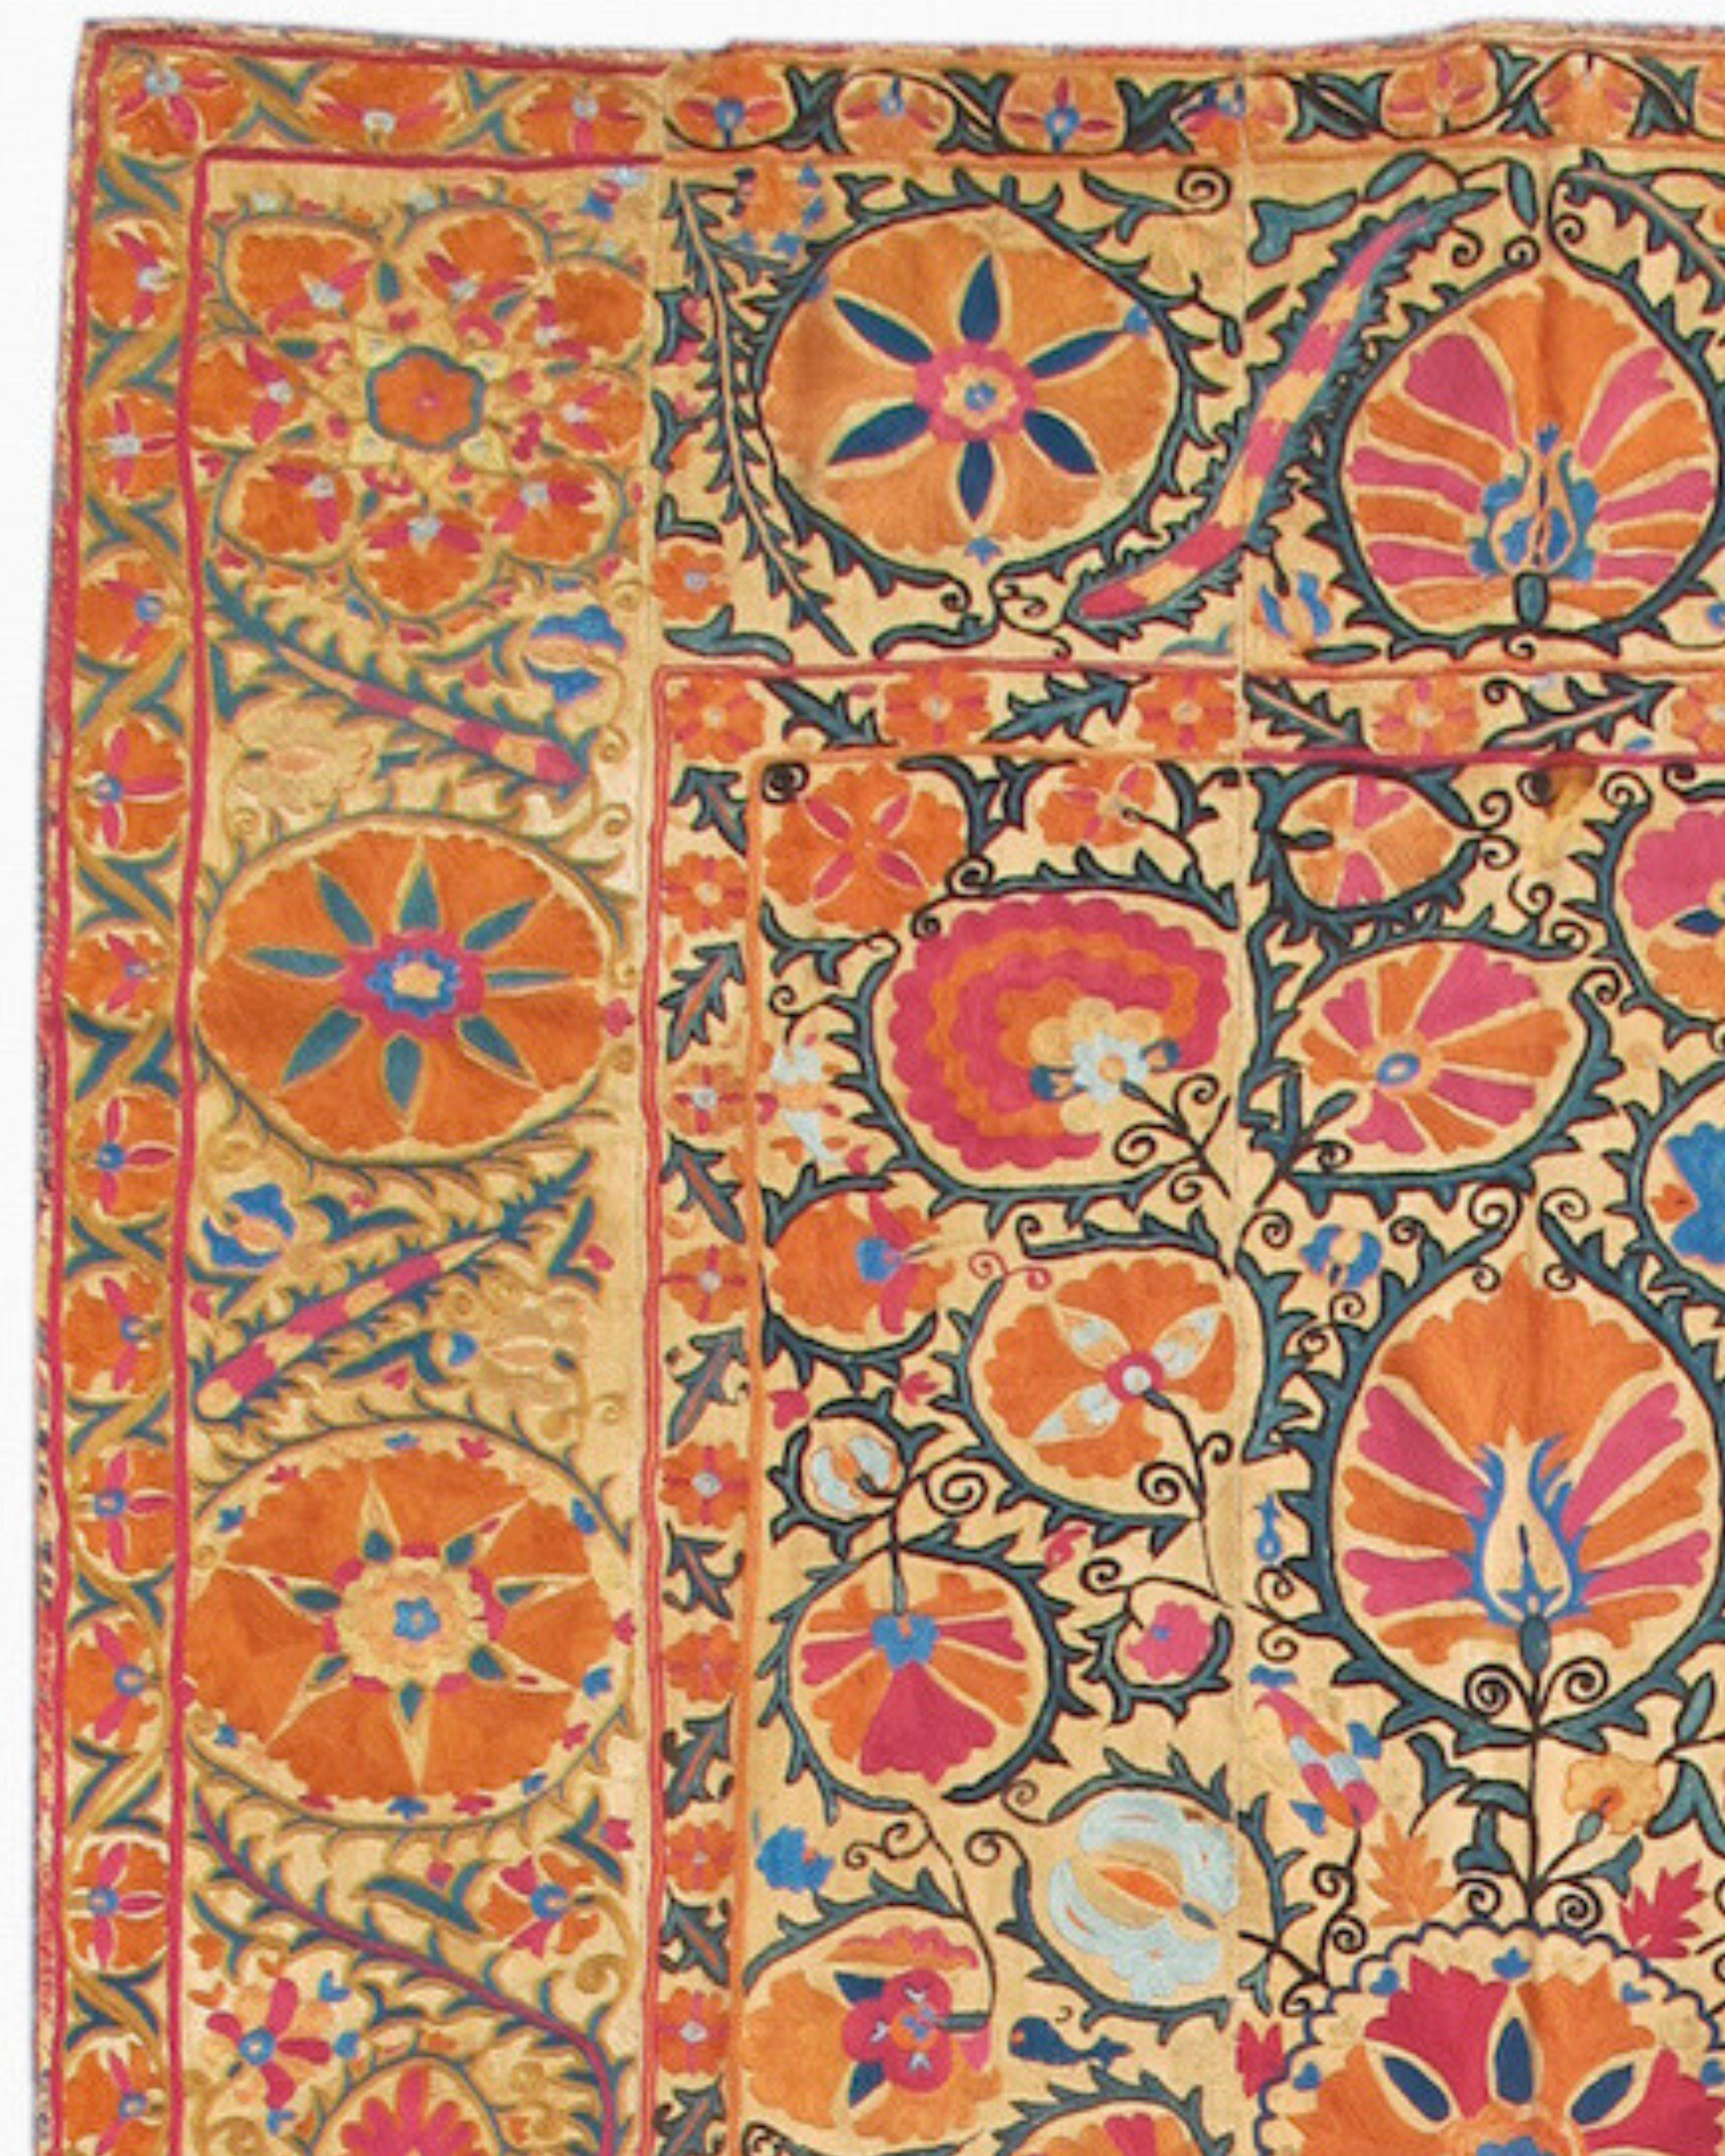 Wool Antique Uzbek Bokhara Suzani Wall-Hanging Tapestry, Mid-19th Century For Sale